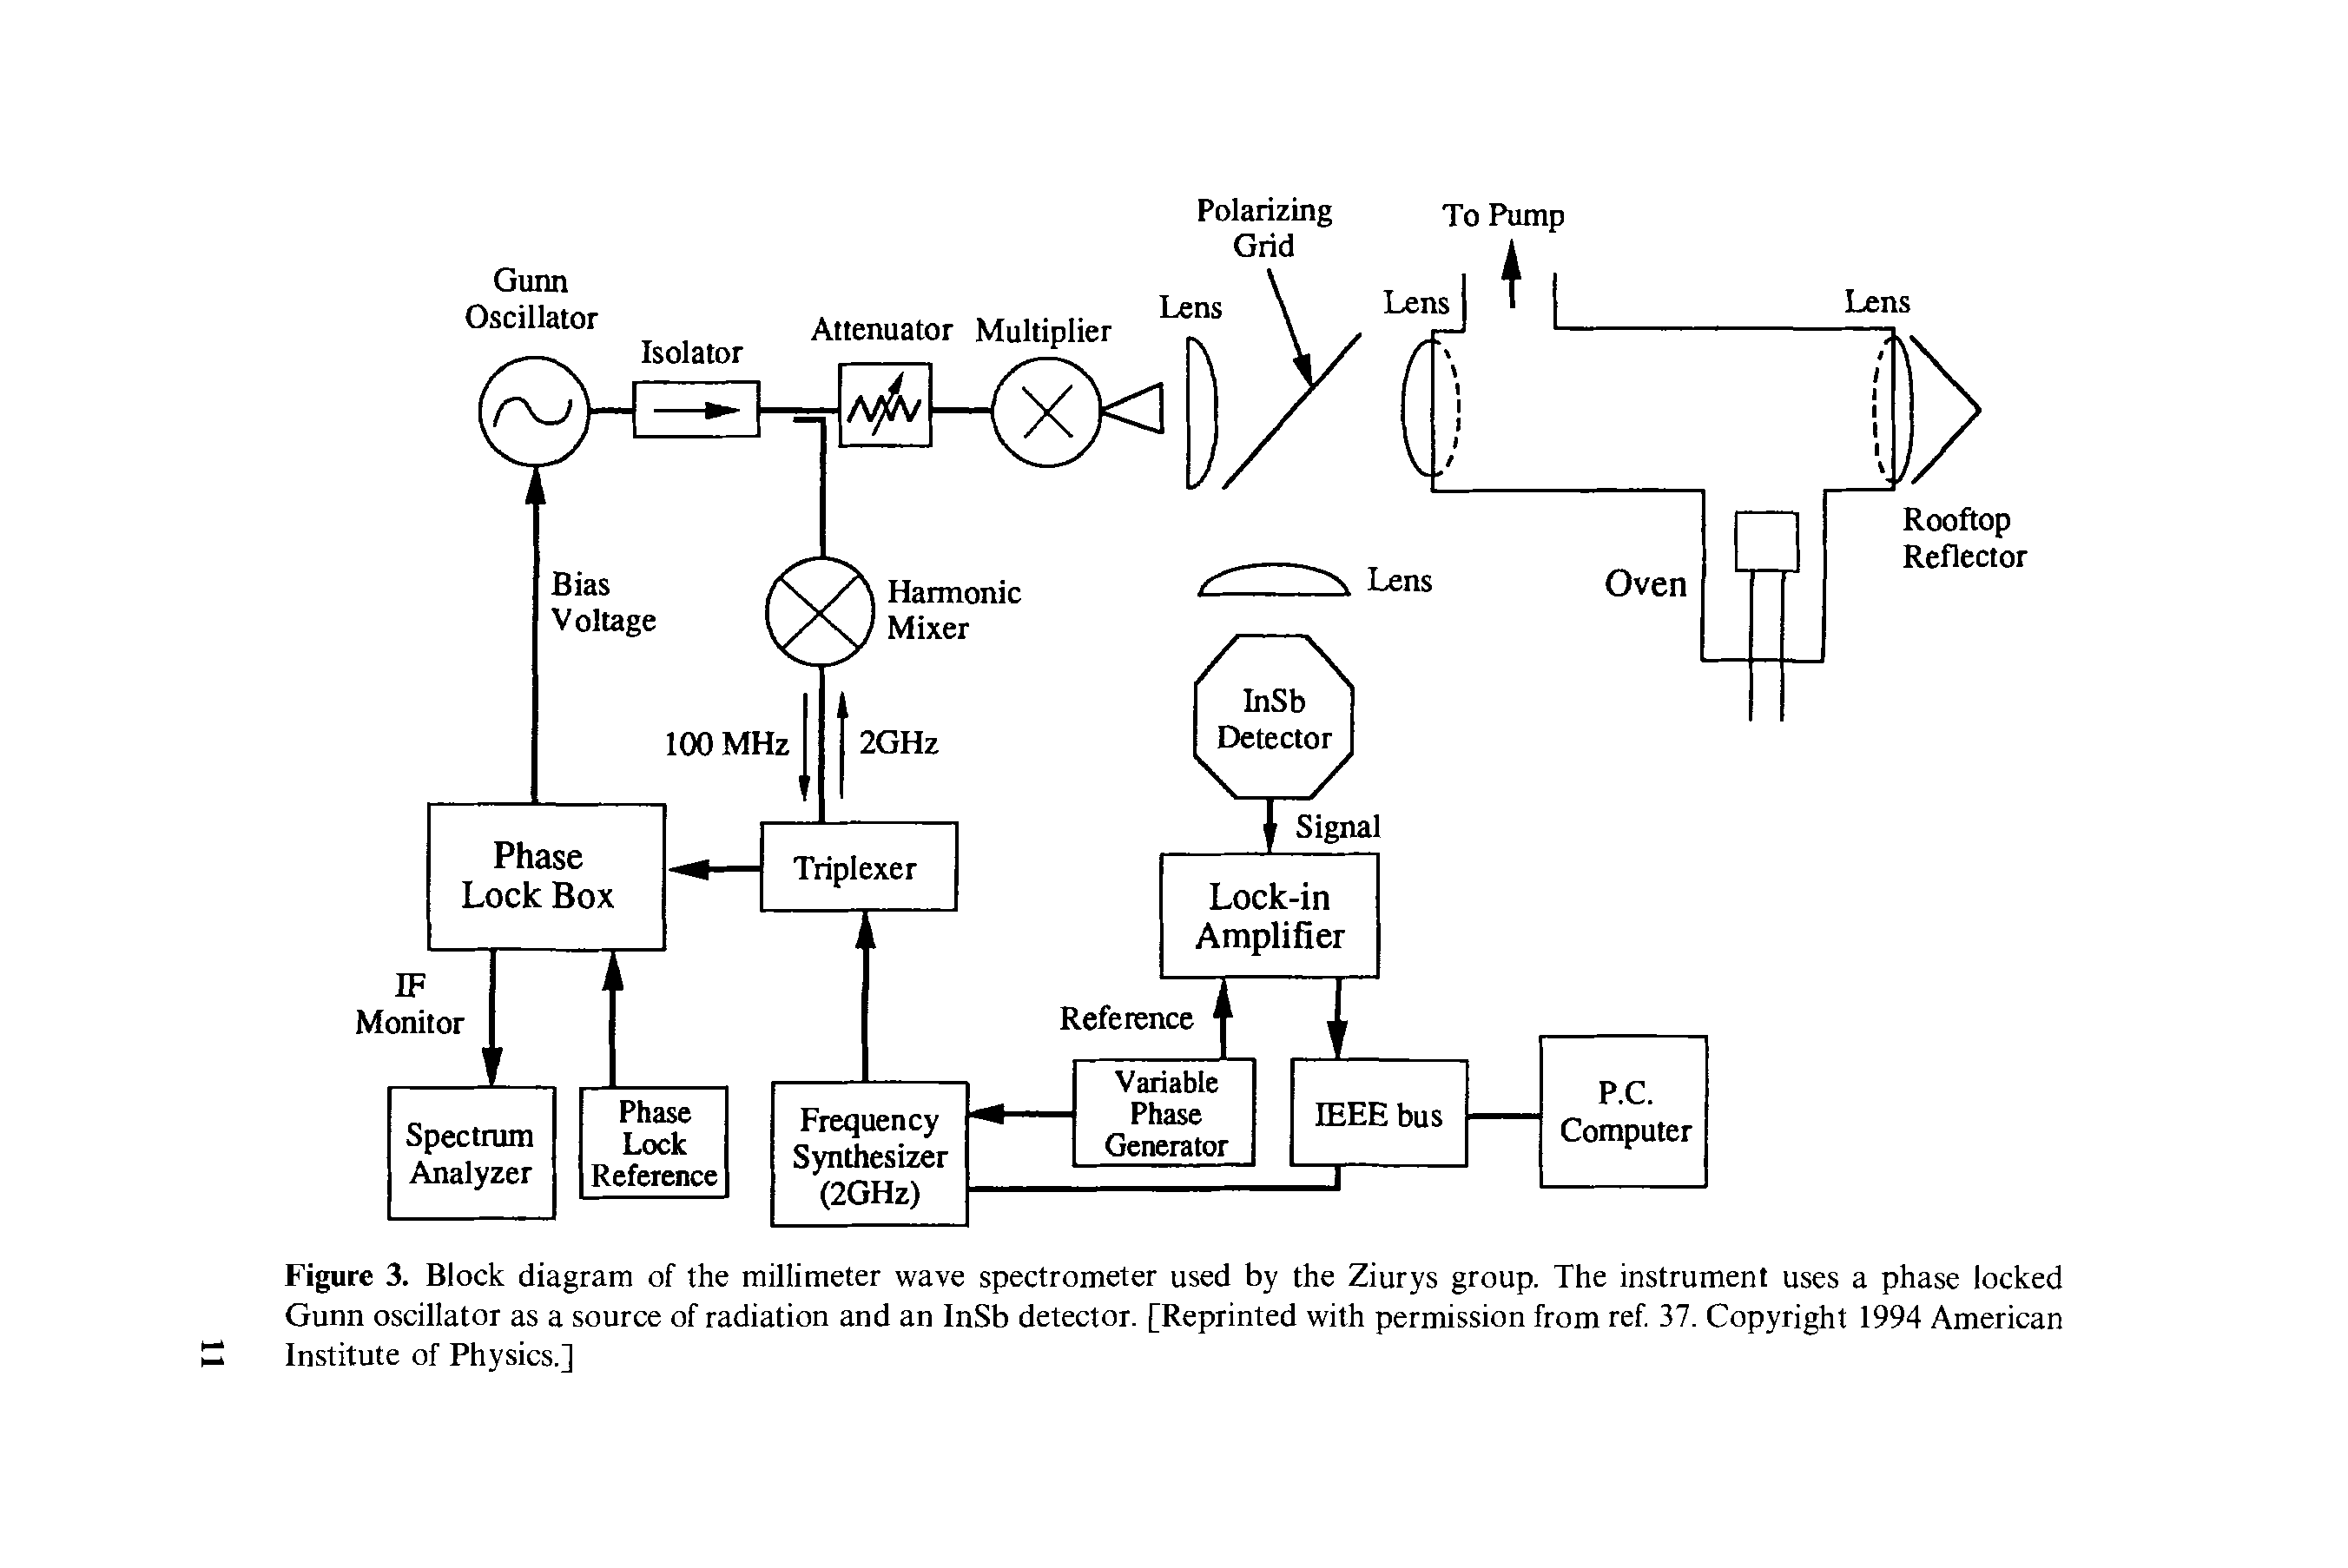 Figure 3. Block diagram of the millimeter wave spectrometer used by the Ziurys group. The instrument uses a phase locked Gunn oscillator as a source of radiation and an InSb detector. [Reprinted with permission from ref. 37. Copyright 1994 American Institute of Physics.]...